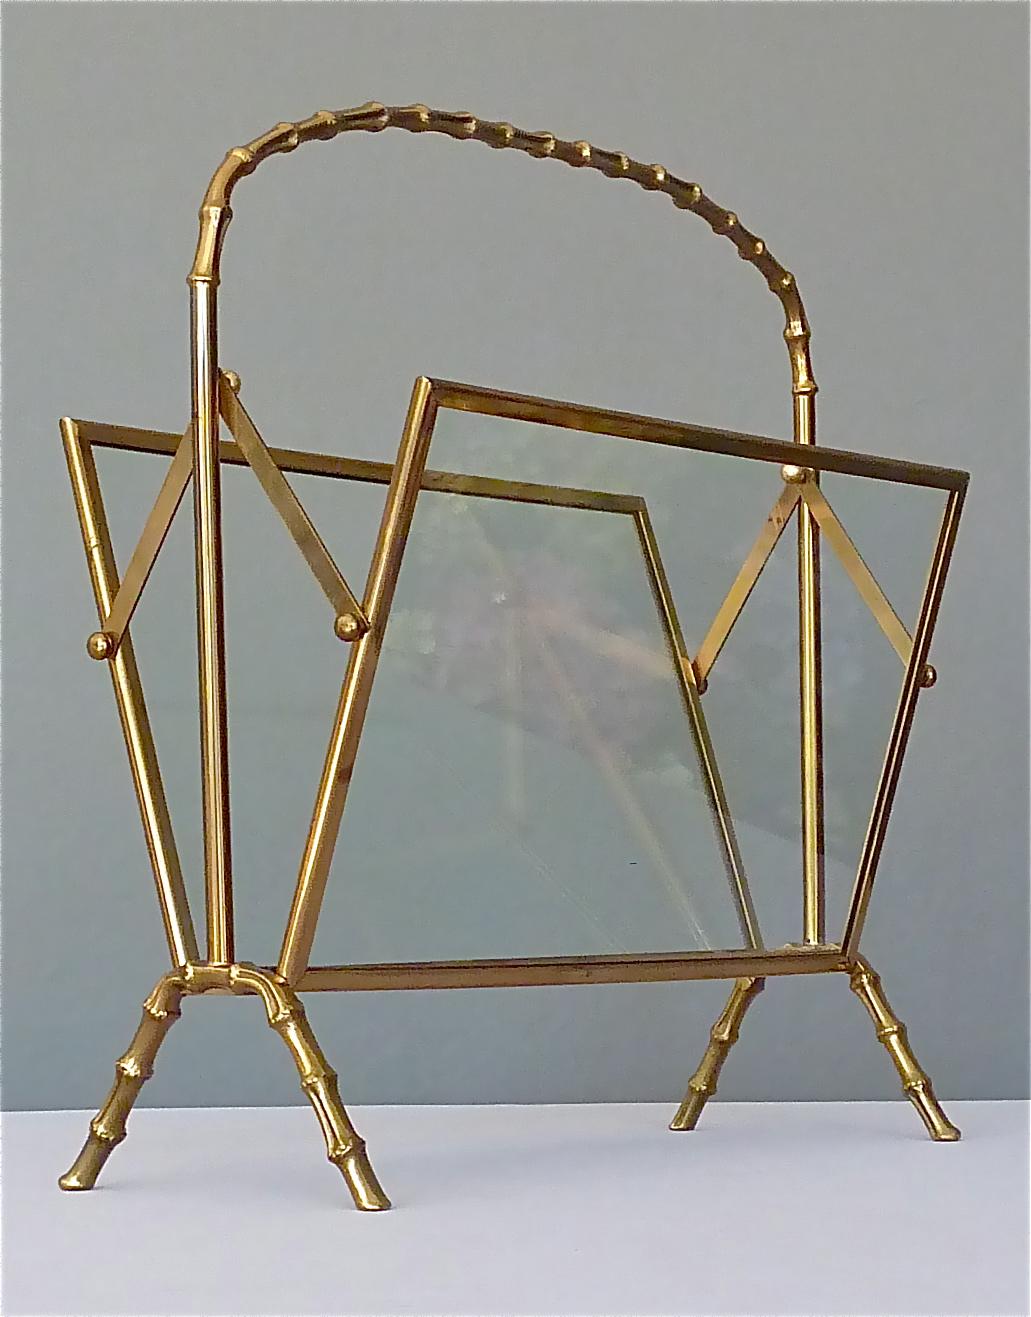 A very nice faux bamboo patinated brass and glass magazine holder or stand by Maison Baguès comparable to Maison Jansen and Maison Charles, France, circa 1950. This vintage piece is made of patinated brass and glass. It has a good weight for a good